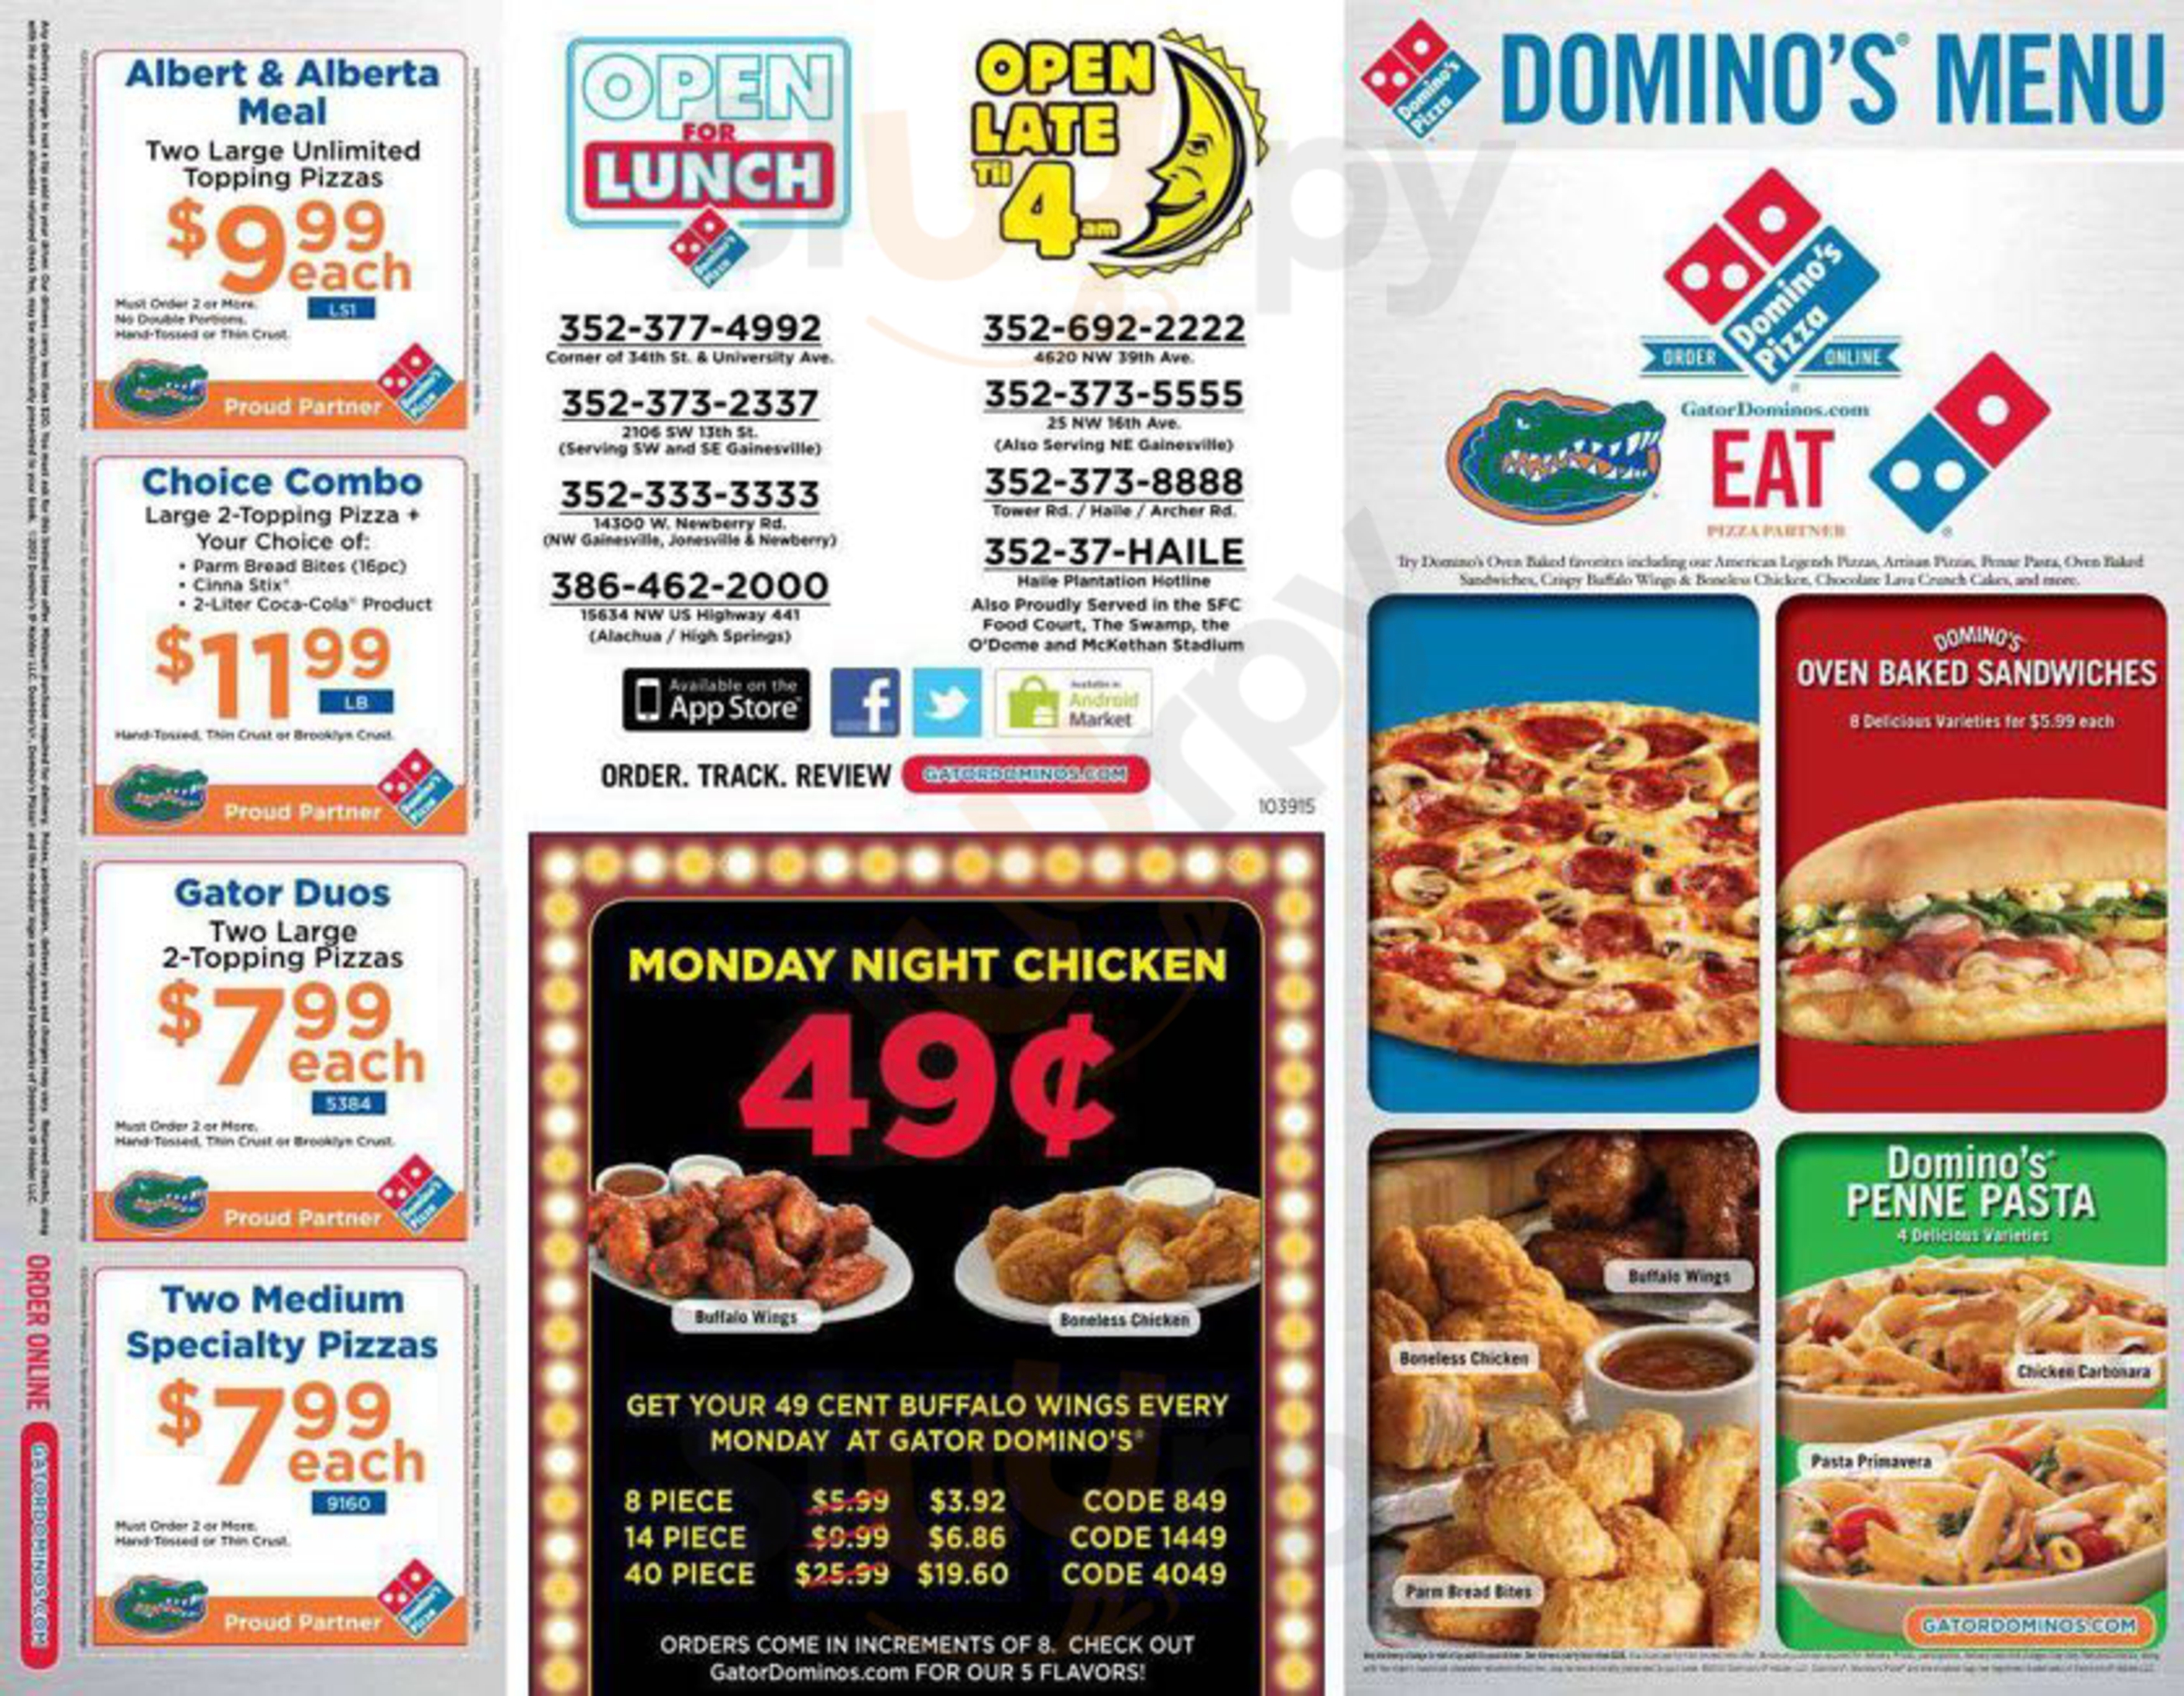 Domino's Pizza Fort Myers Menu - 1